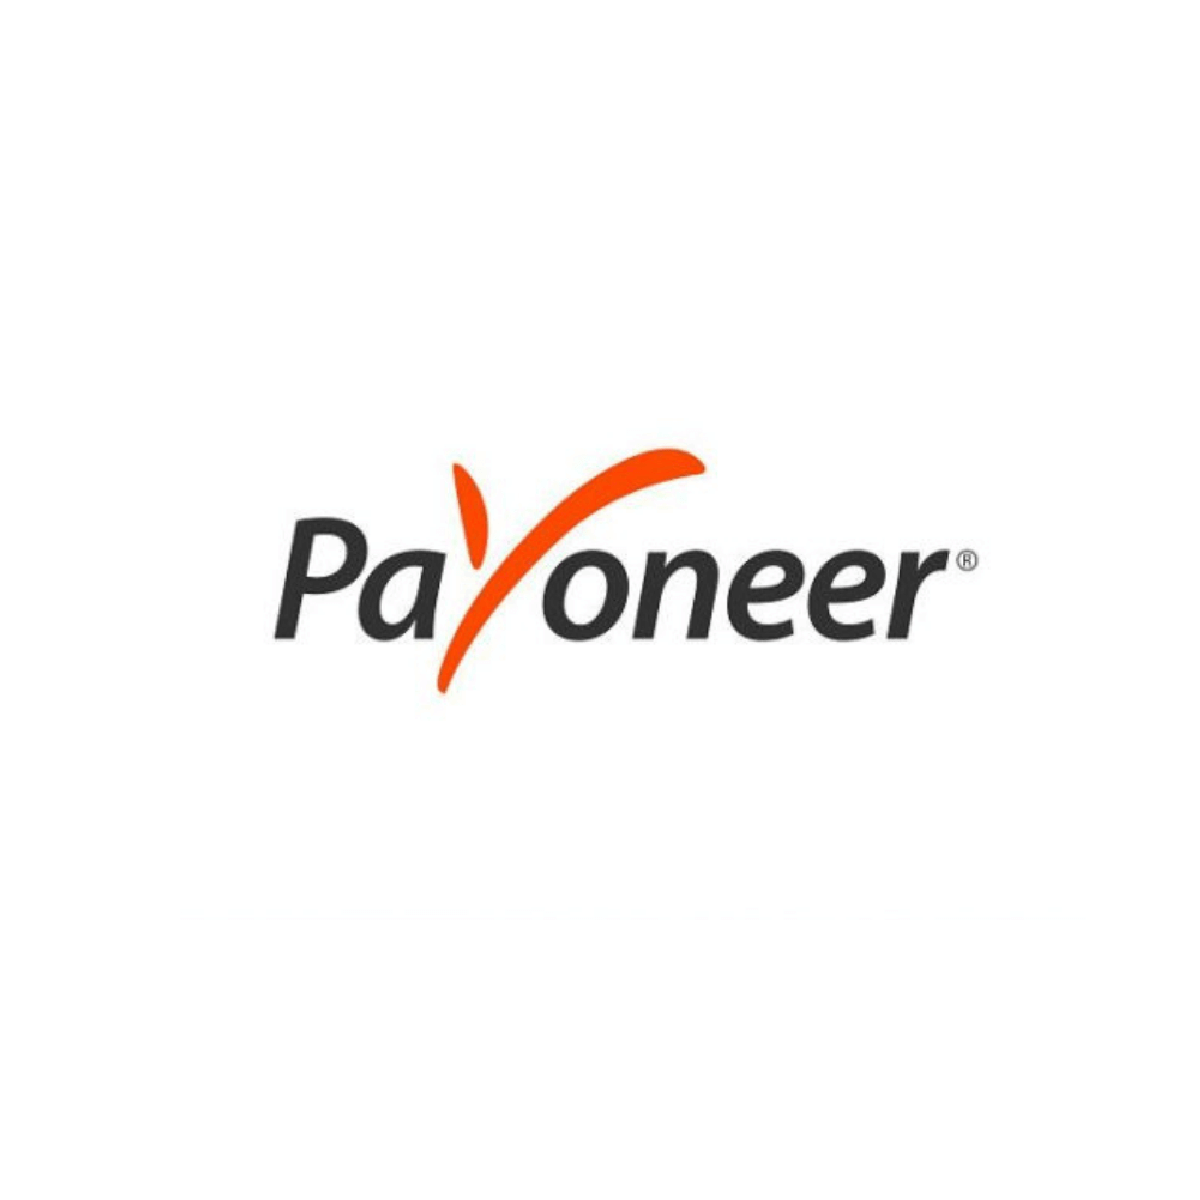 How to Deposit Money In Payoneer Account